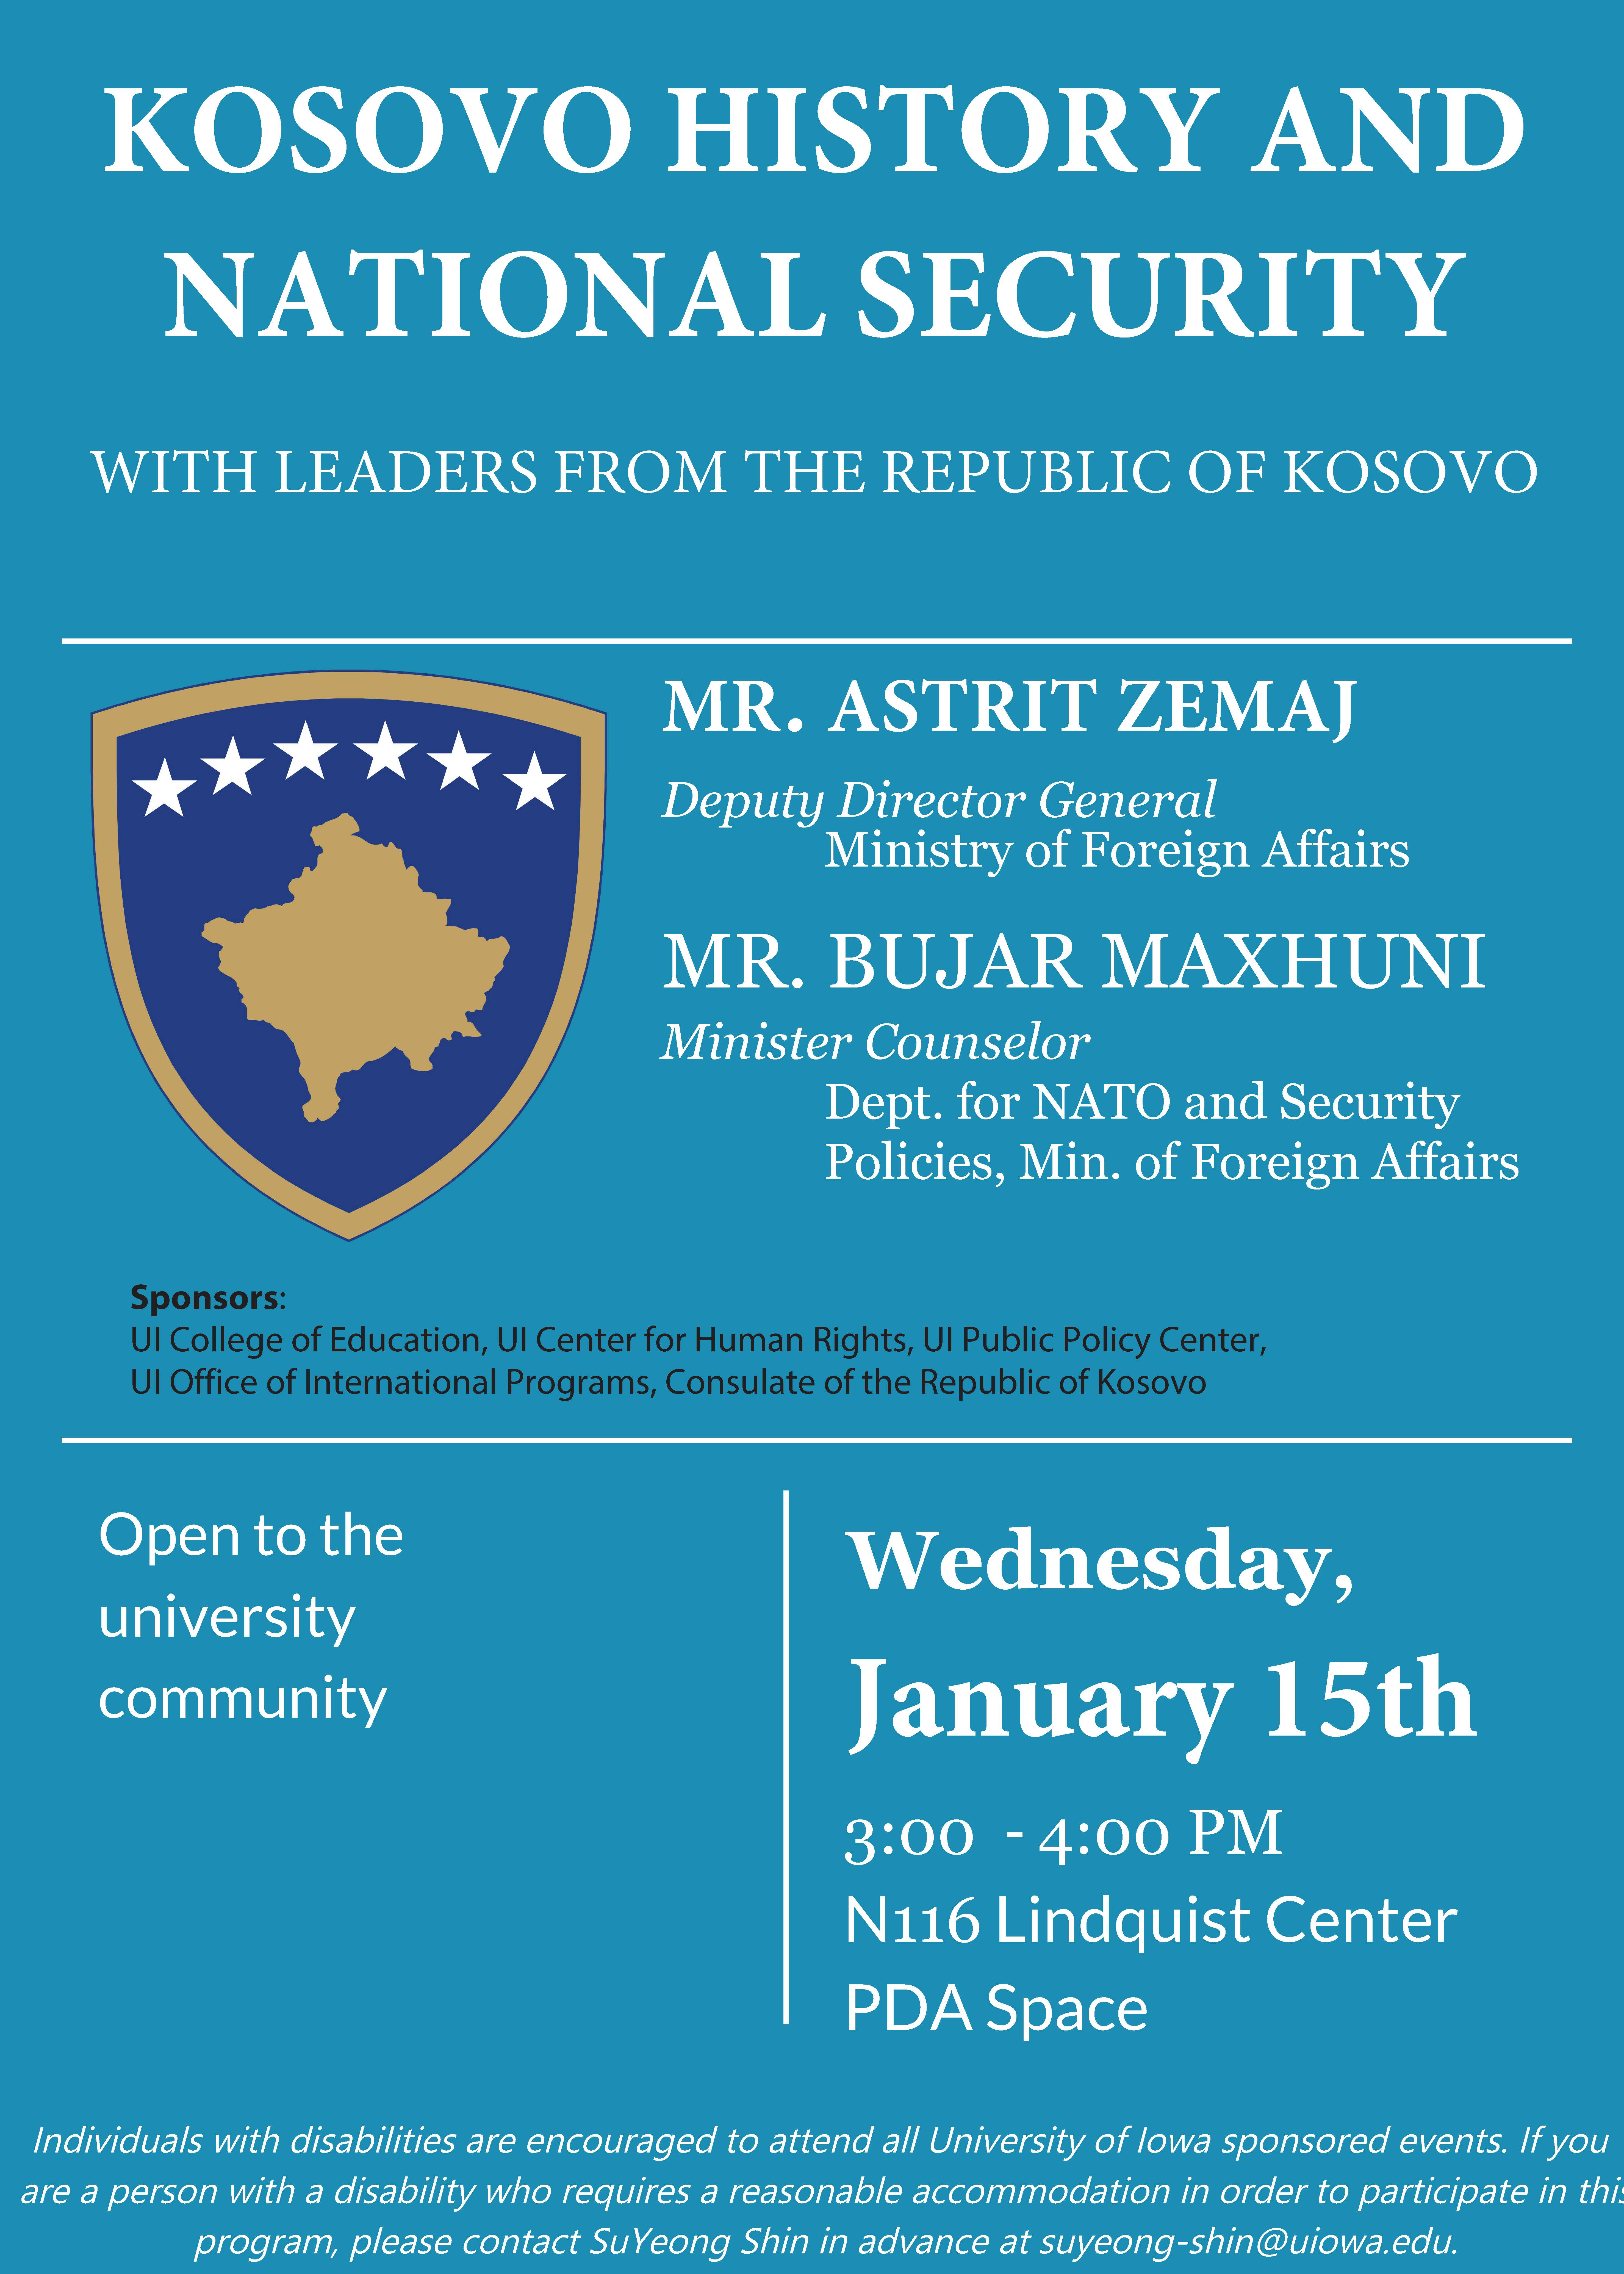 Kosovo History and National Security lecture January 15